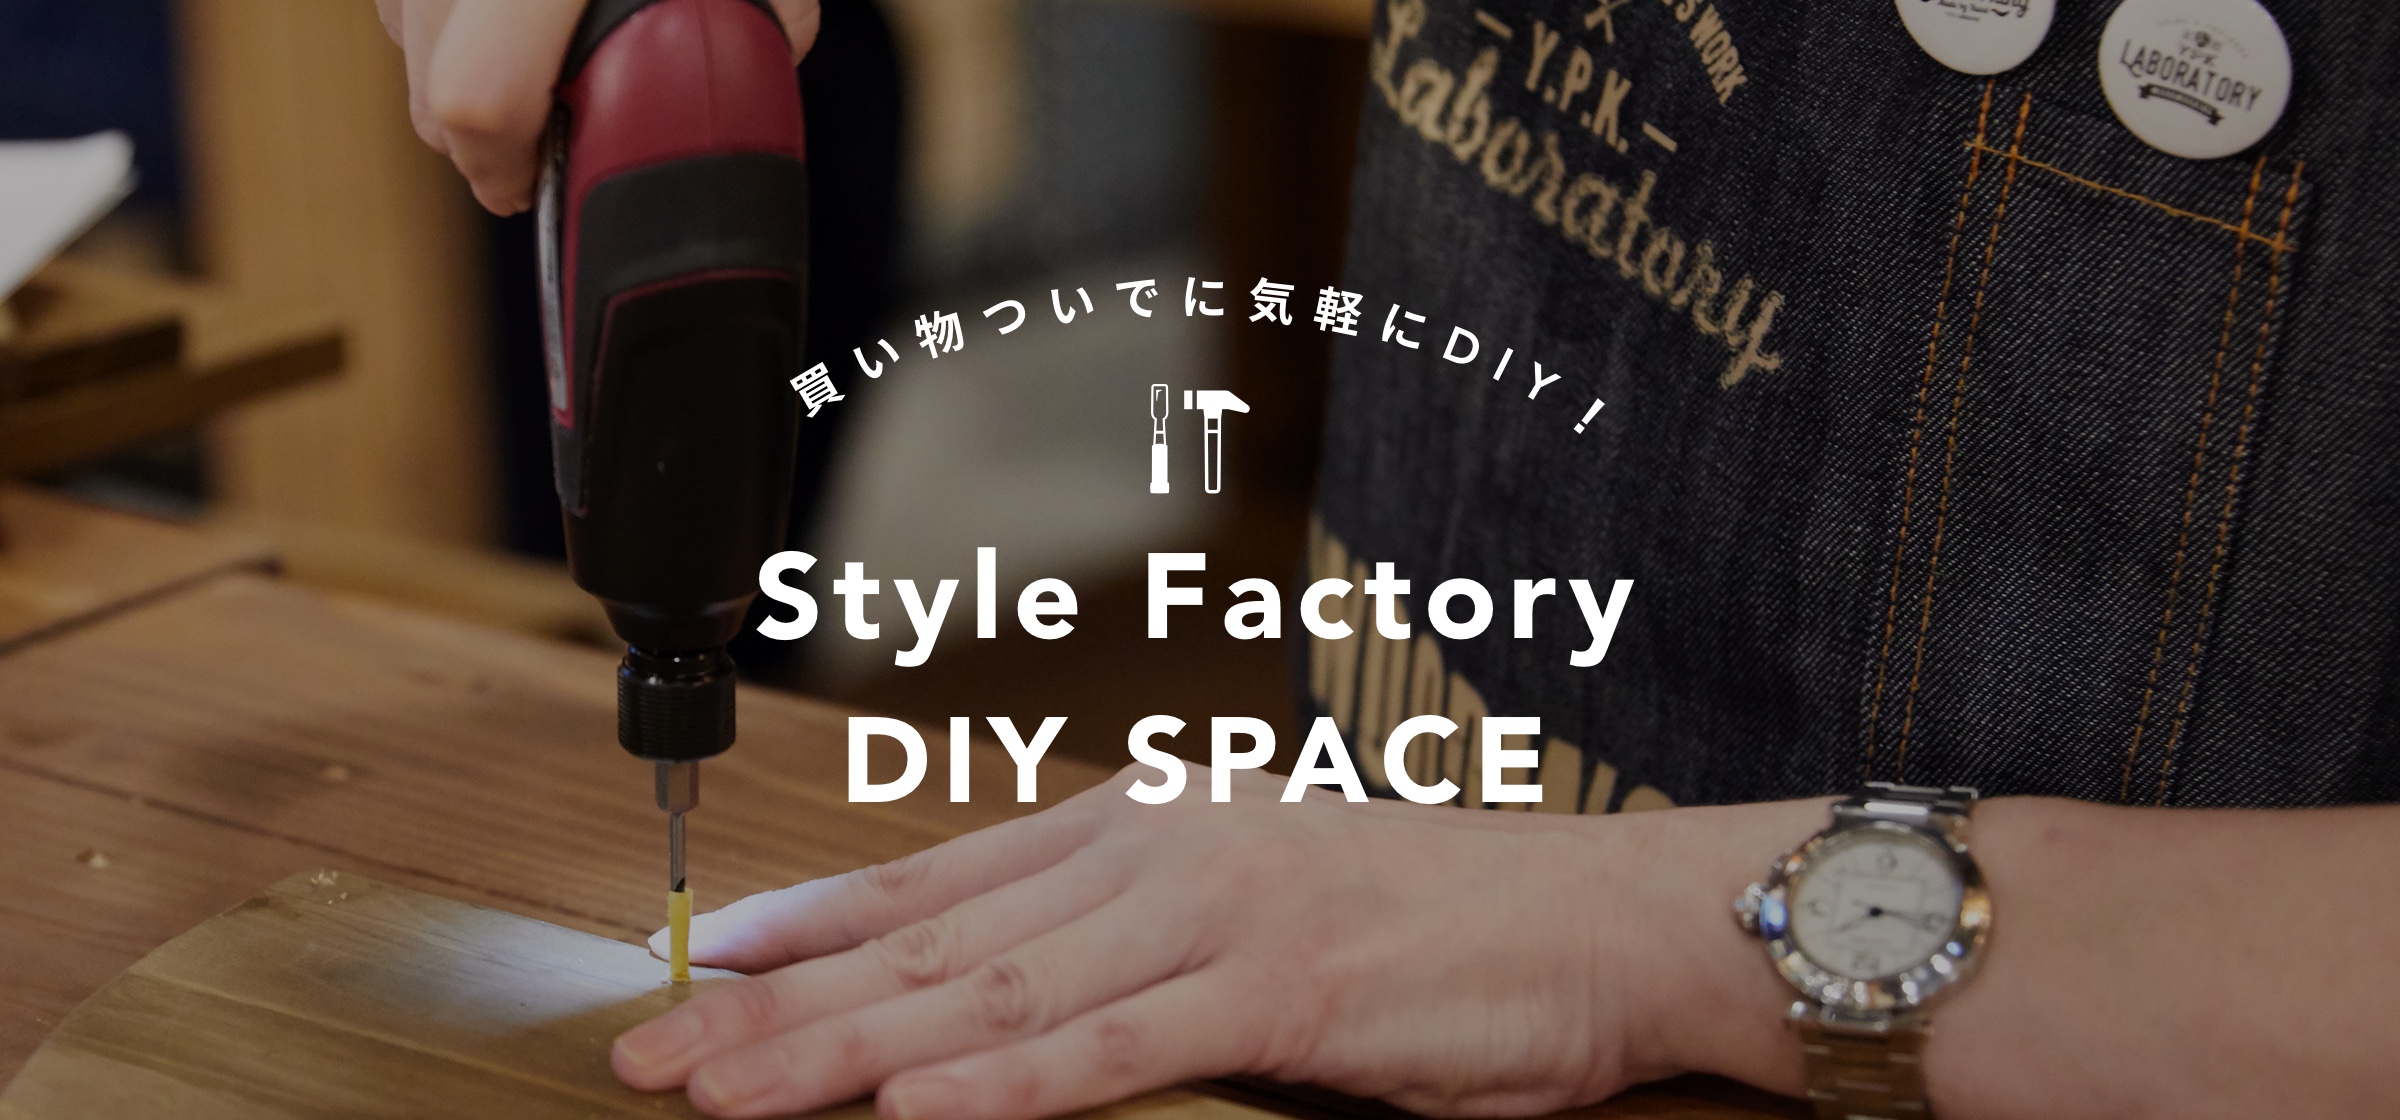 Style Factory DIY SPACE店舗内風景